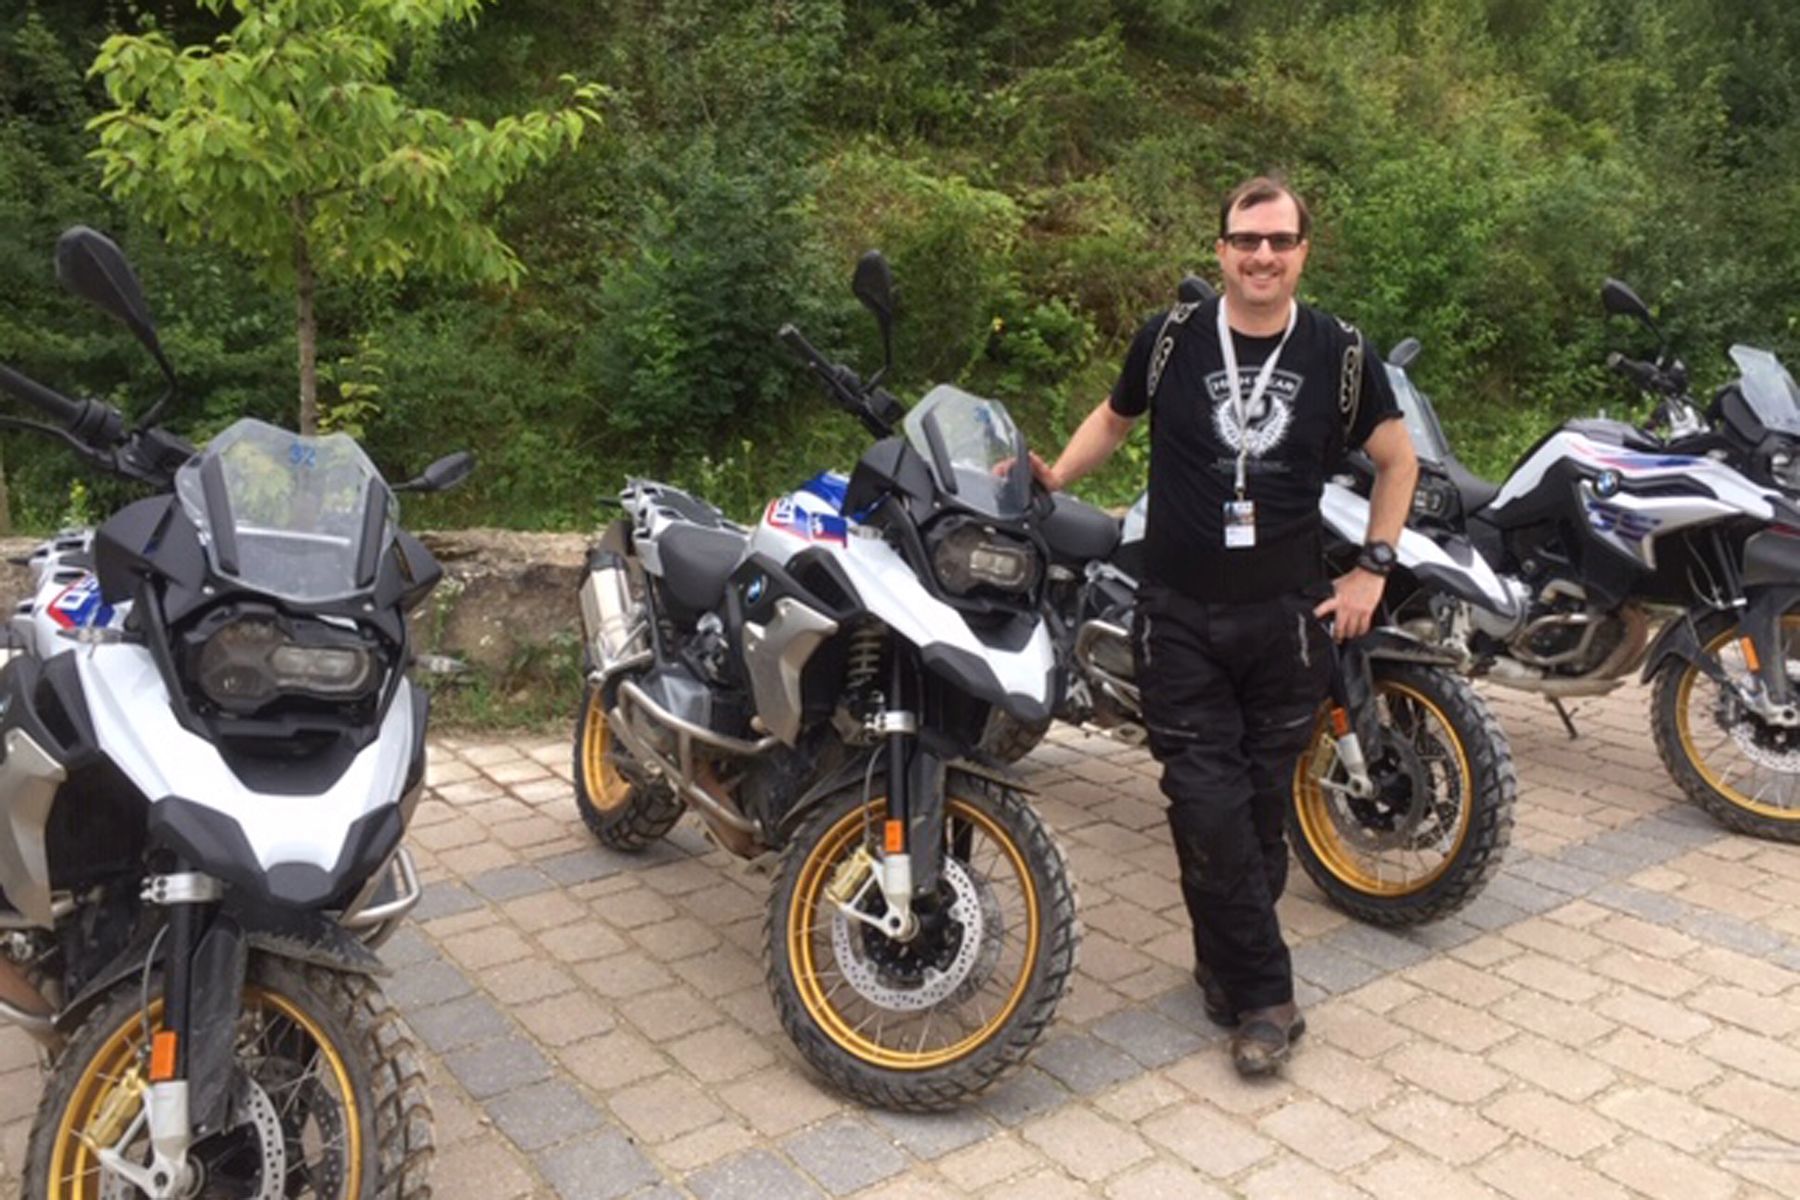 BMW’s Motorrad Instructor Academy is where top motorcycle trainers get